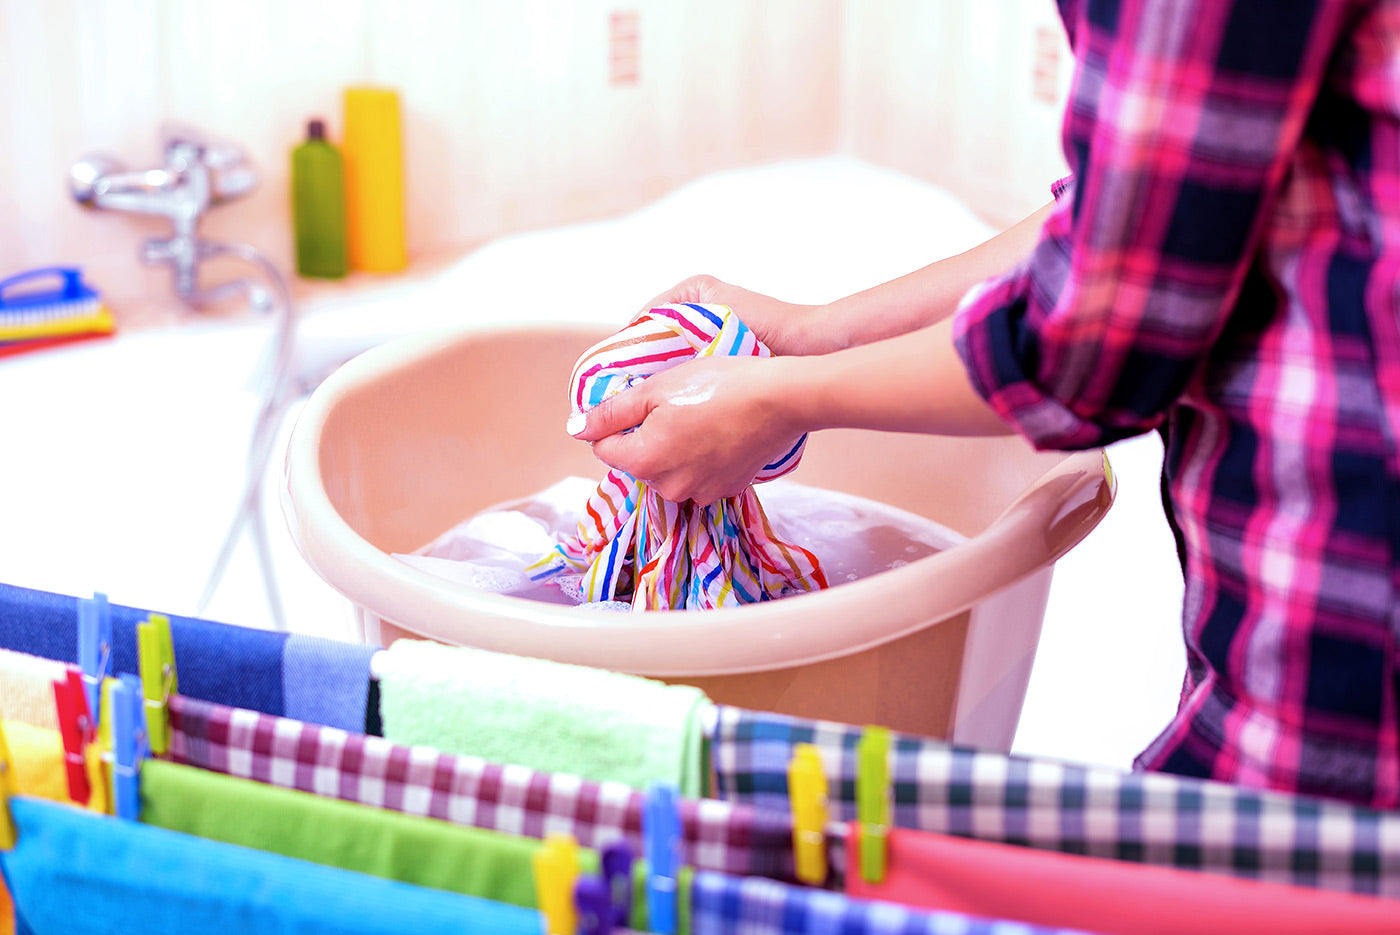 Why Consider Laundry Stripping - Is it a Cleansing Trend or Tease?